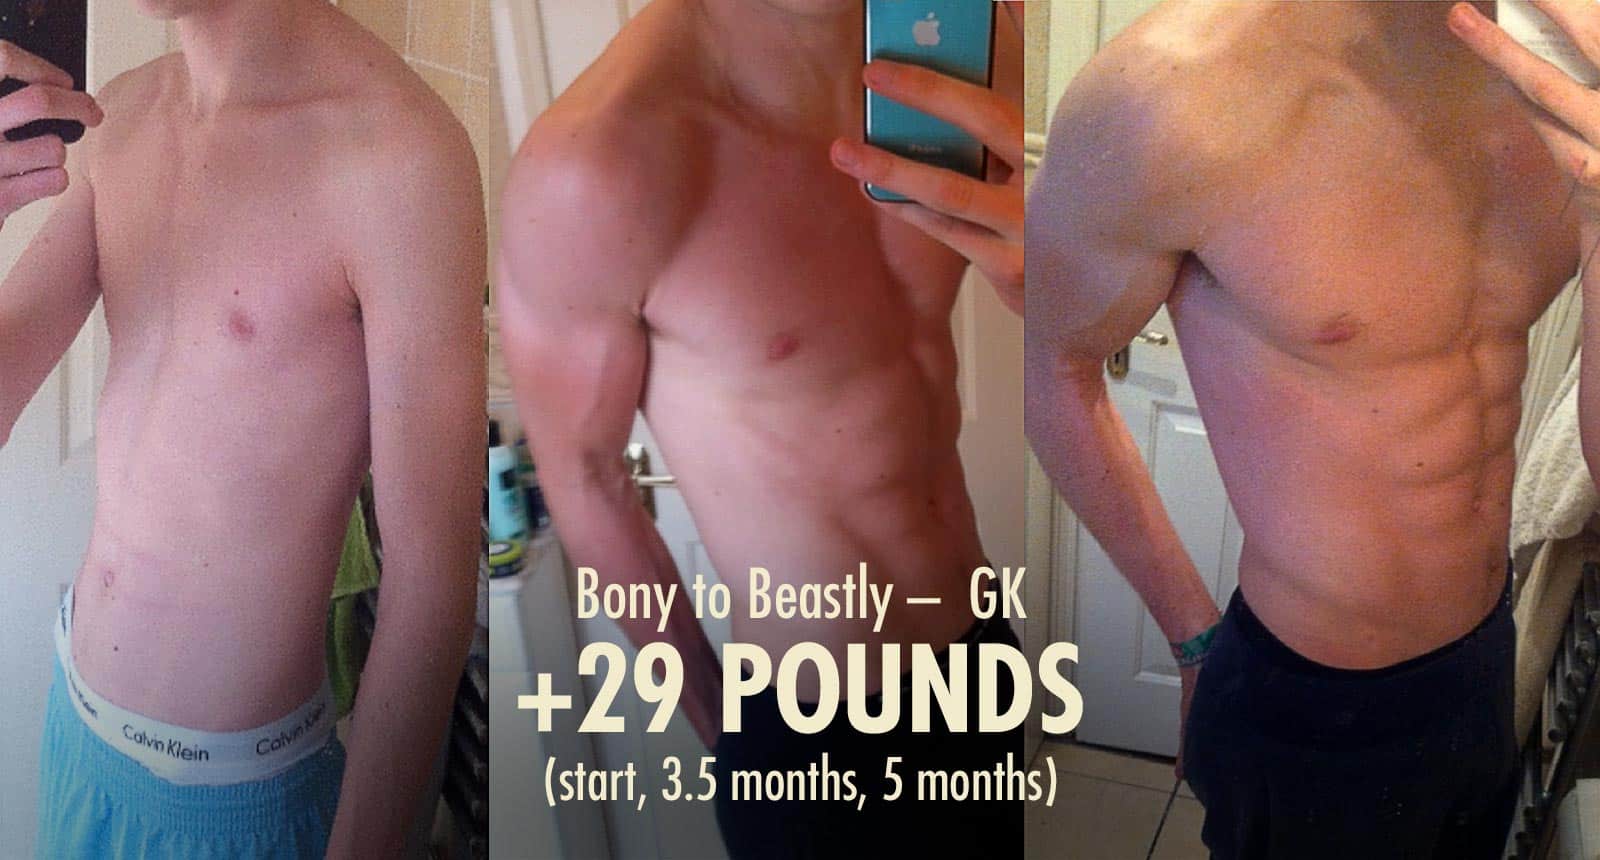 Review of the Bony to Beastly Program.